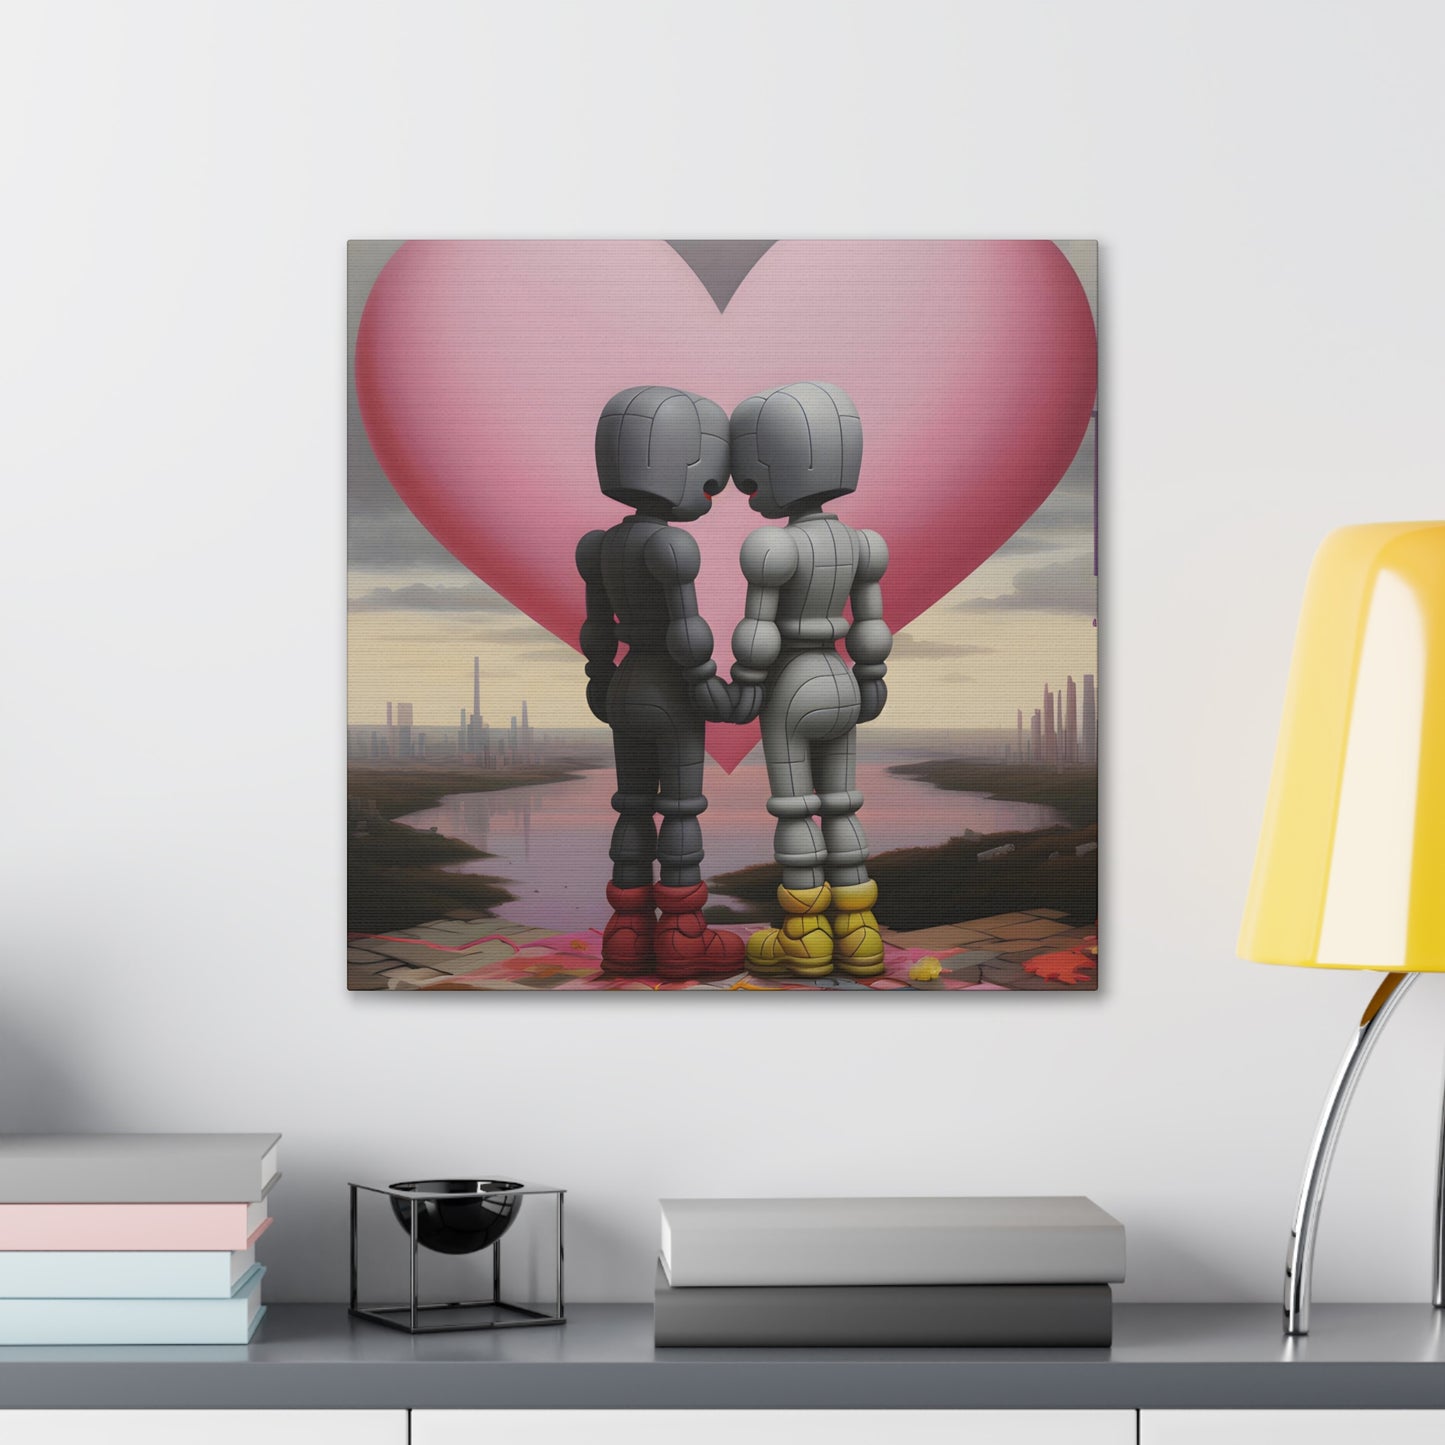 in situ 2 Contemporary artwork by Archer Dent, reflecting on connection in a mechanized era, blending urban surrealism with a tender embrace against a stark cityscape, provoking thoughts on love amidst modernity.